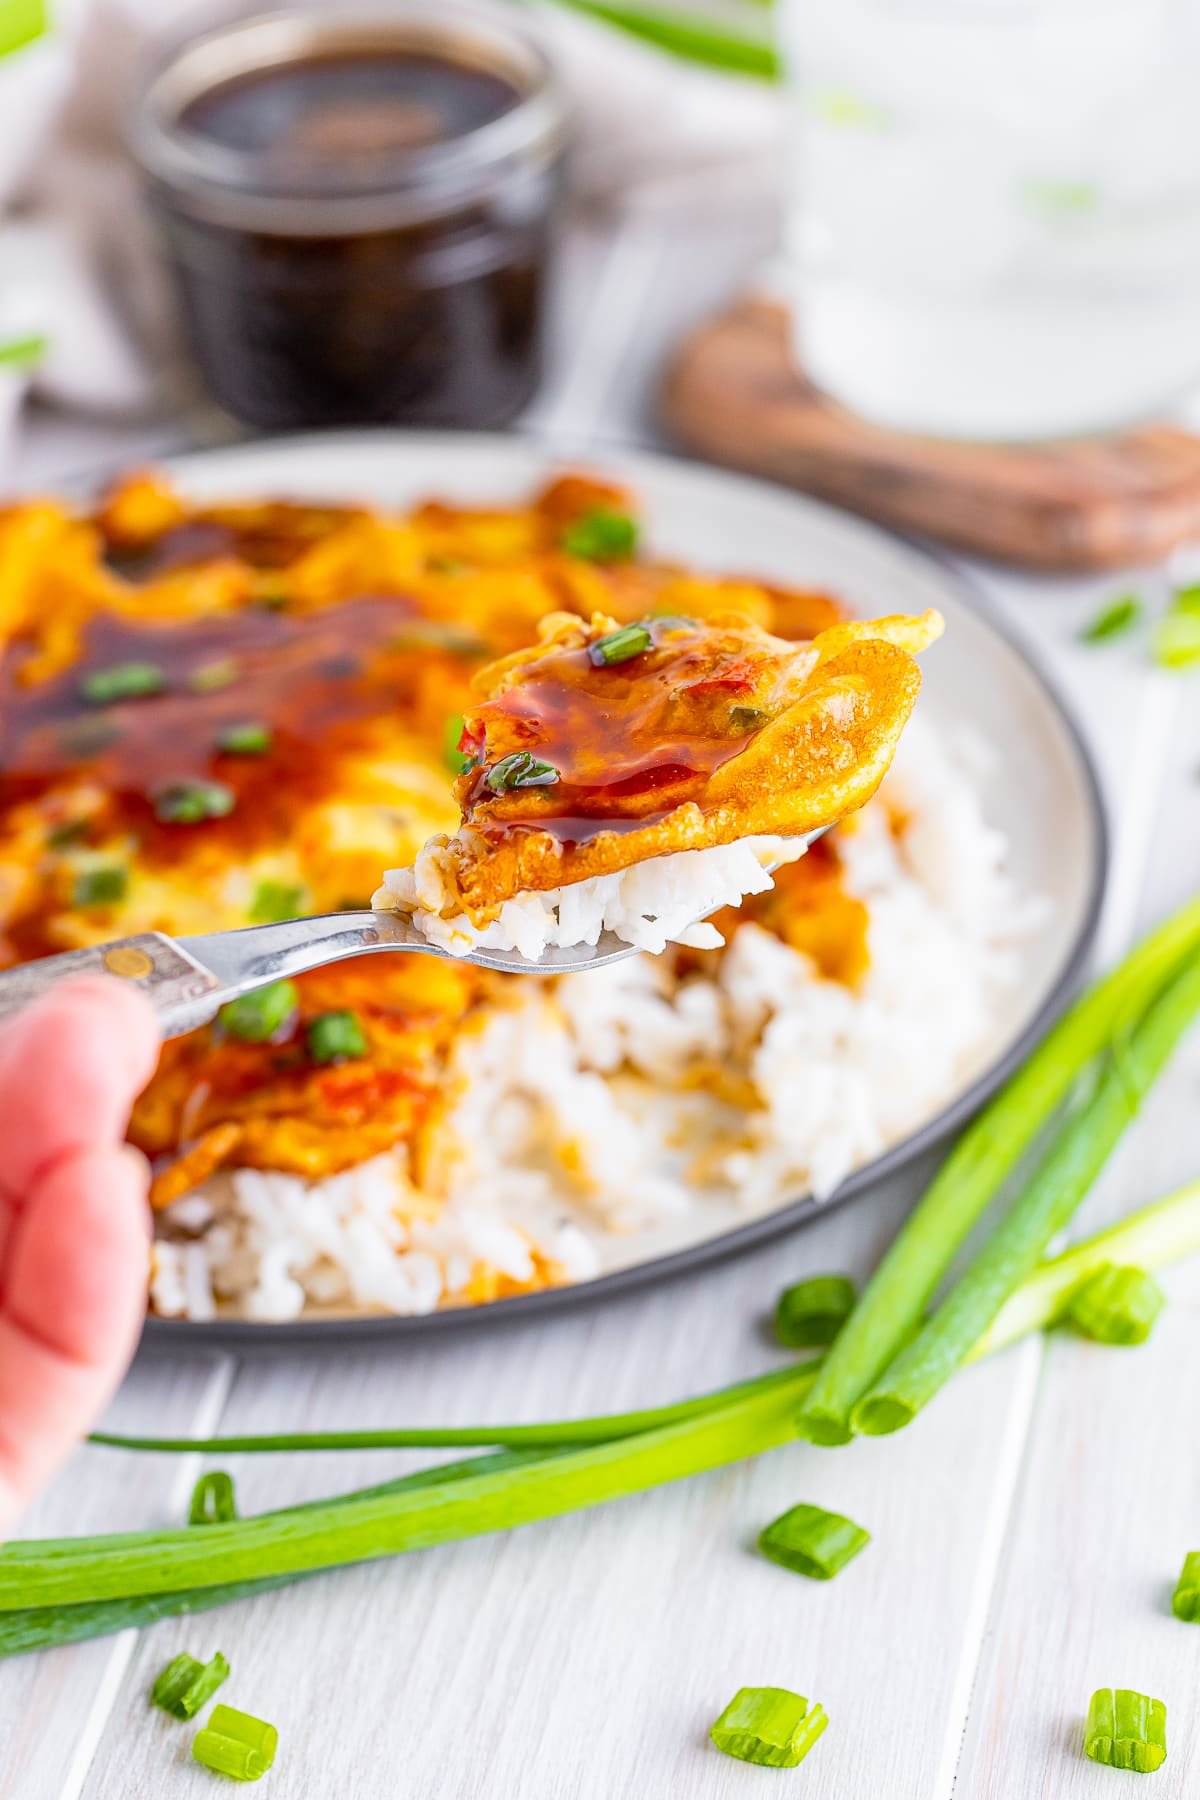 A fork holding up a bite of Vegetable Egg Foo Young Recipe with the plate blurred in the background with jar of sauce, ice water, and scallions